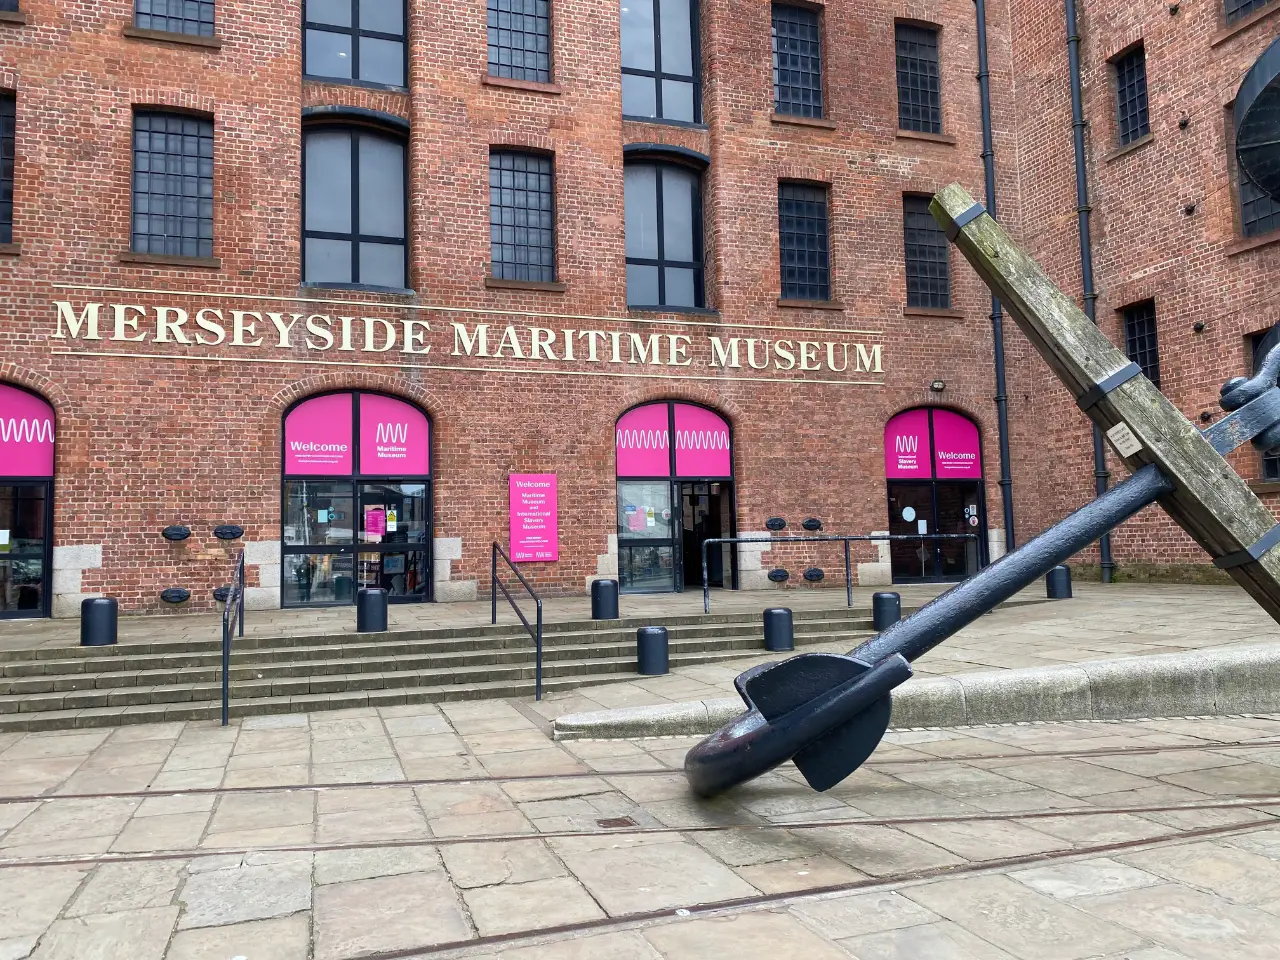 Merseyside Maritime Museum from the outside